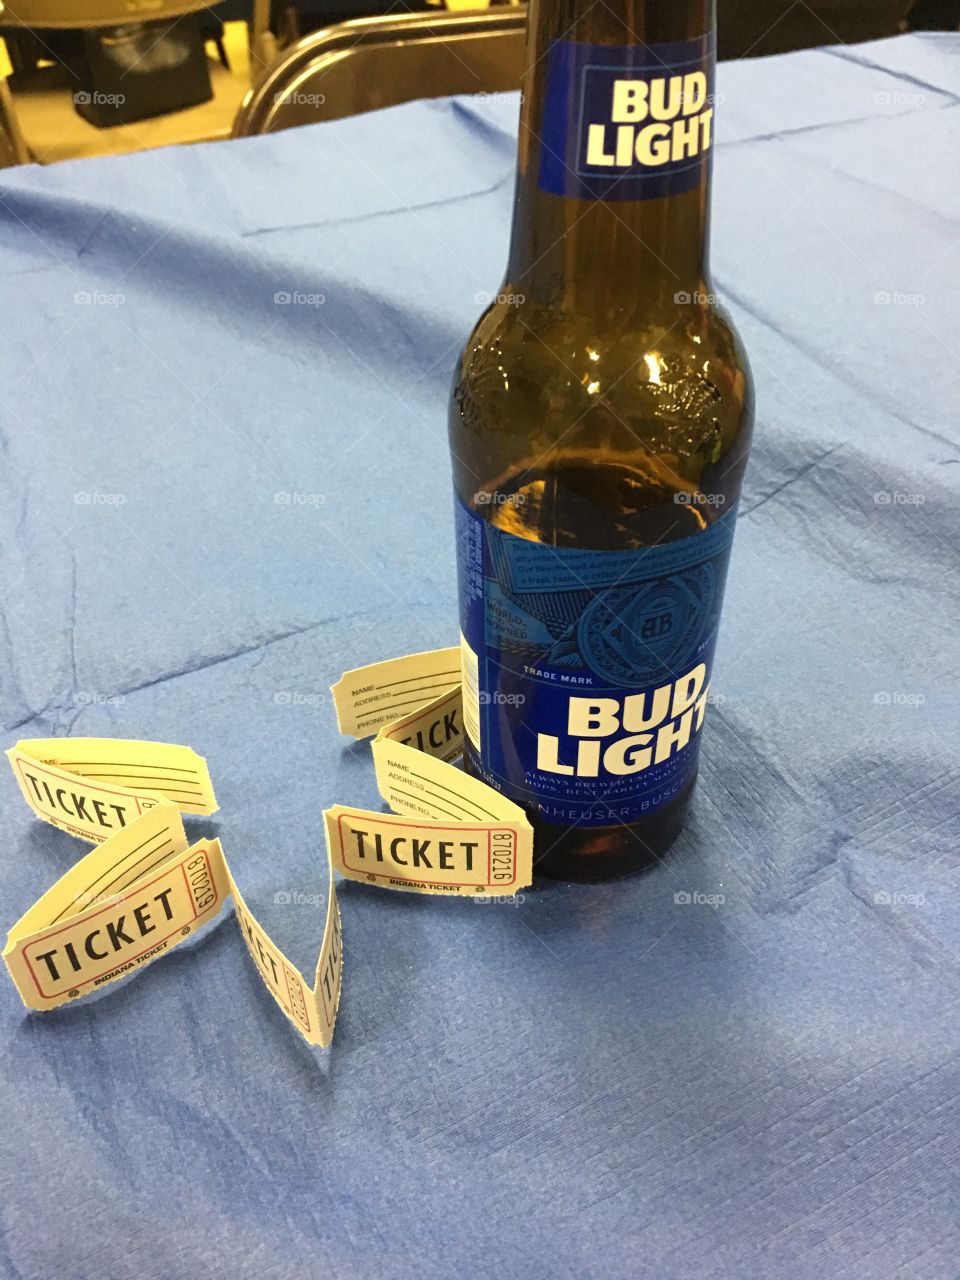 Bud Light and door prize ticket.... feel lucky!!!!